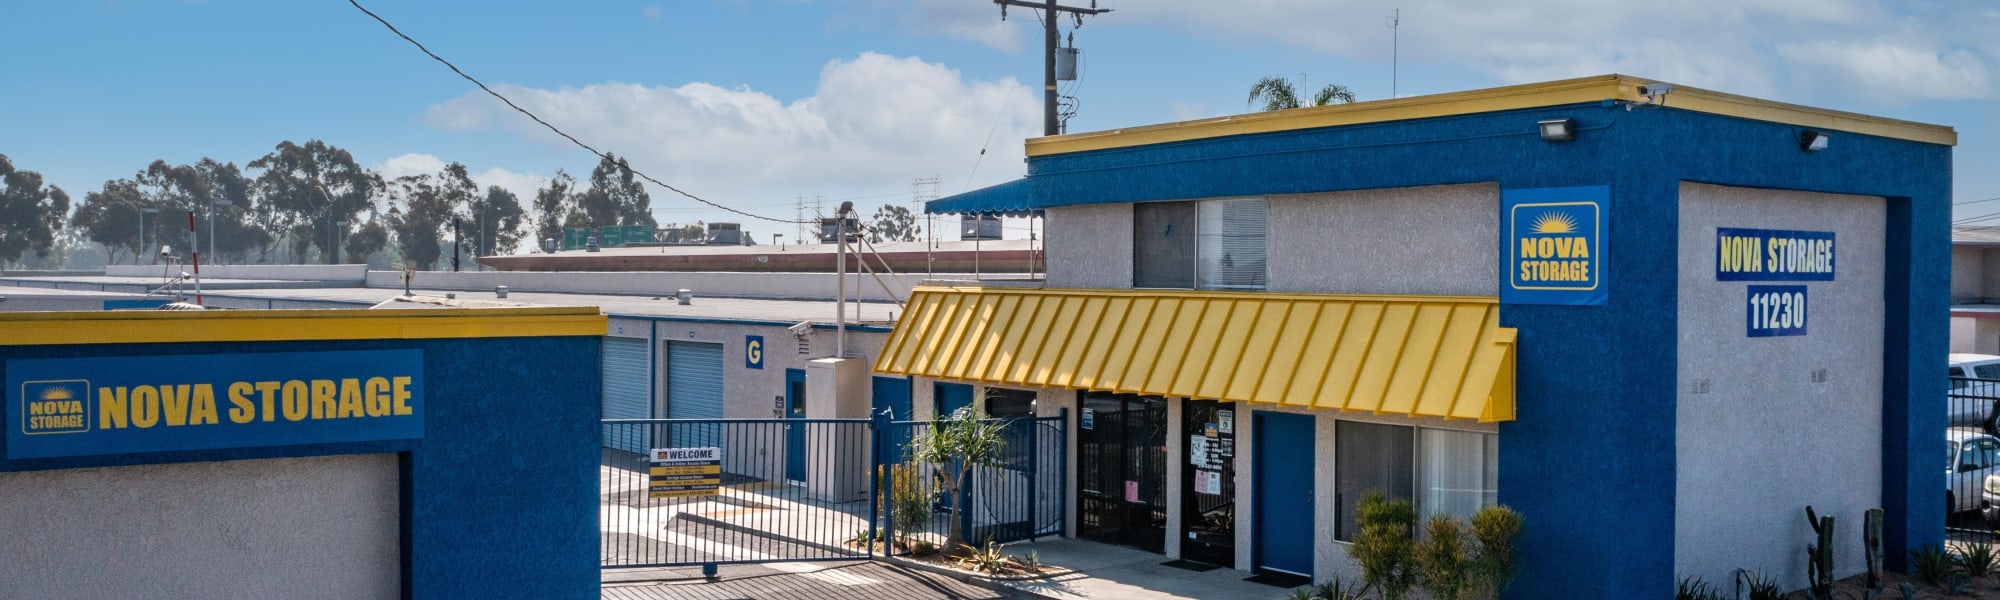 Find and rent a storage unit from Nova Storage in Lynwood, California